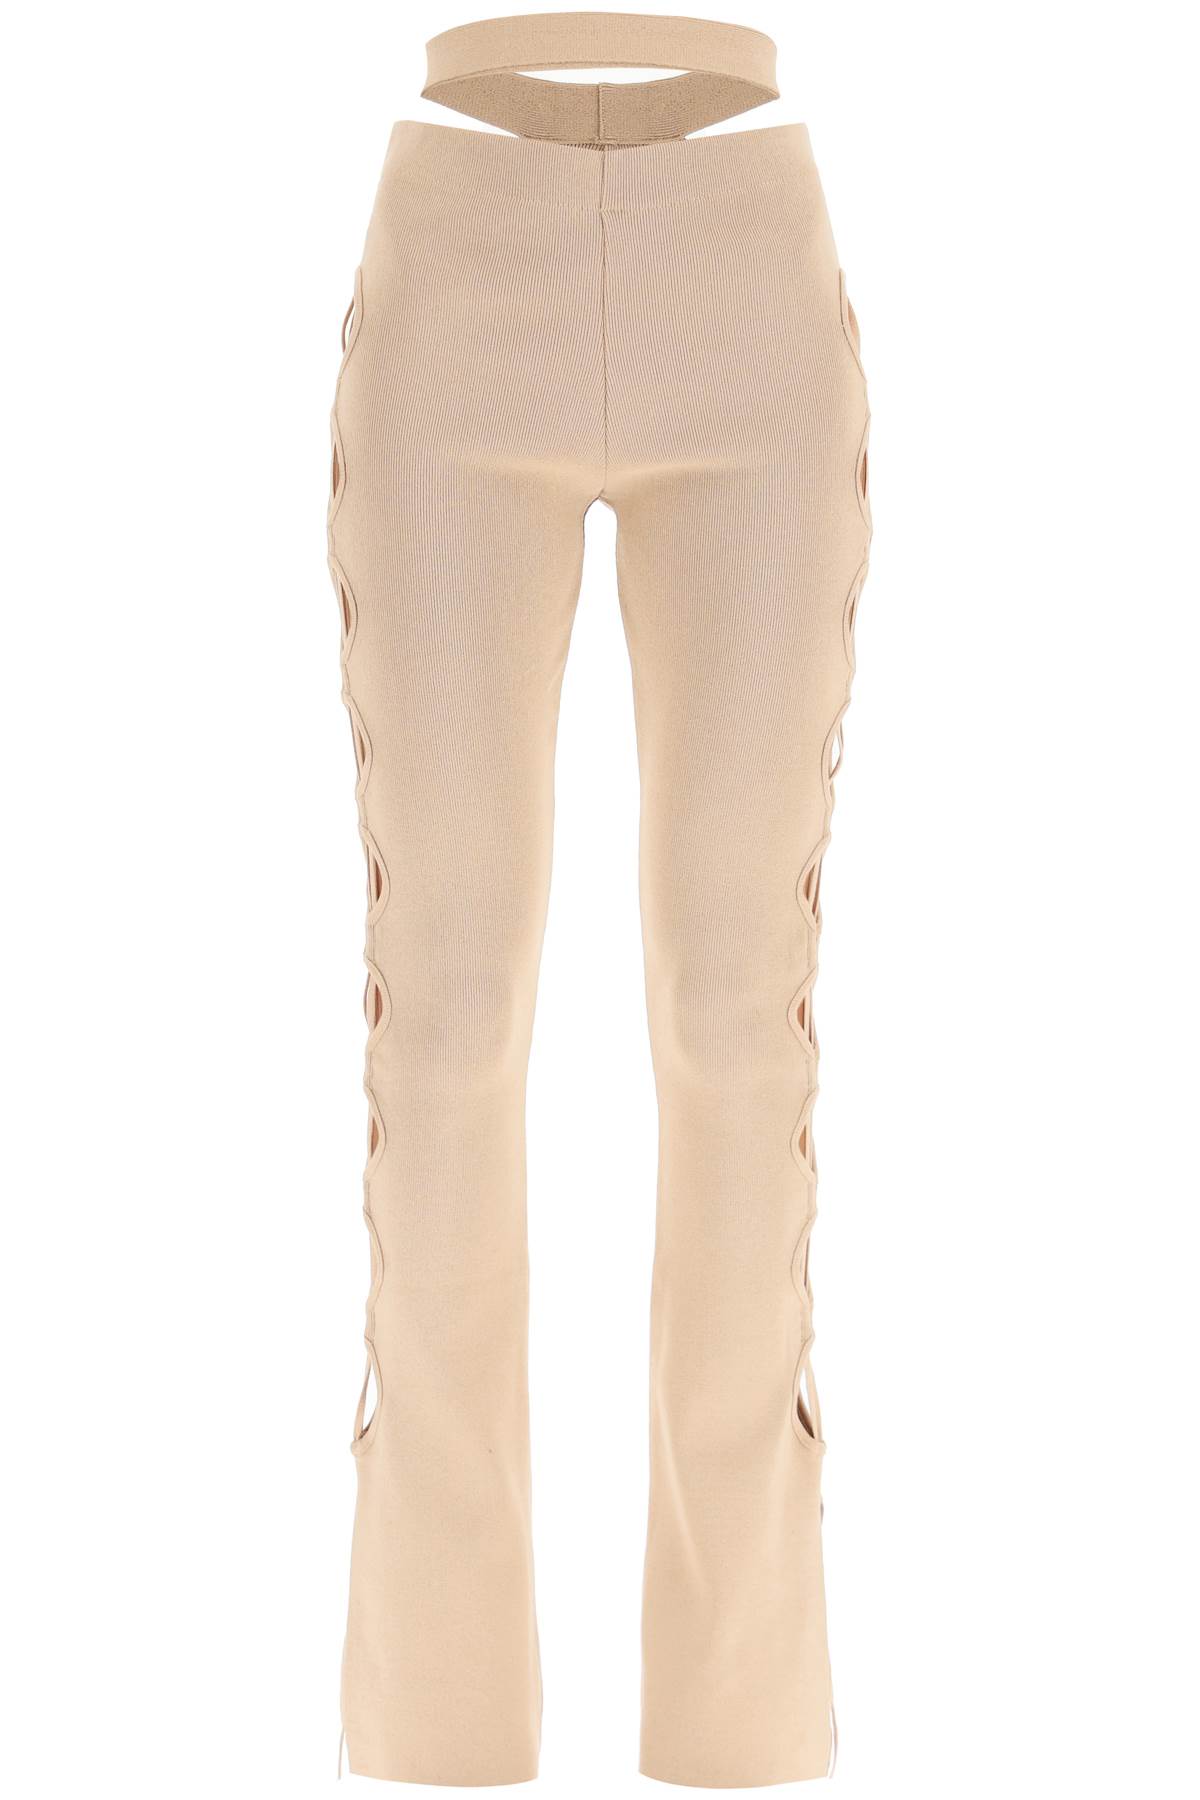 ANDREADAMO Flared Jersey Pants With Cut Outs